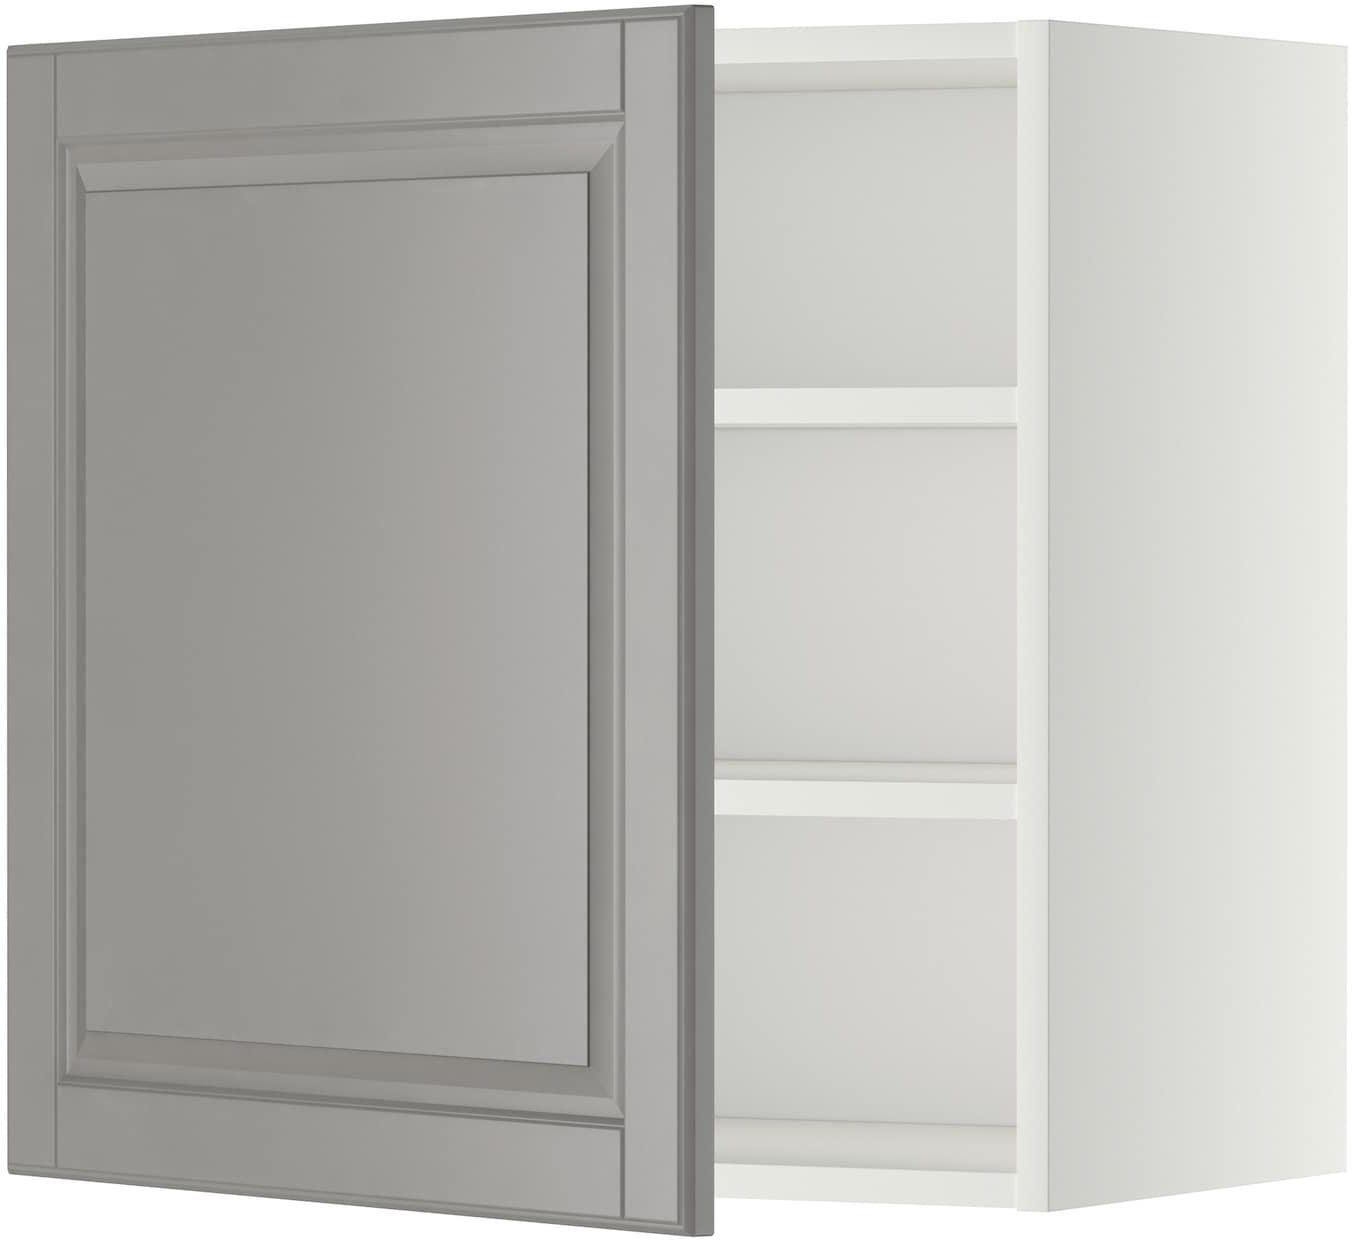 METOD Wall cabinet with shelves - white/Bodbyn grey 60x60 cm